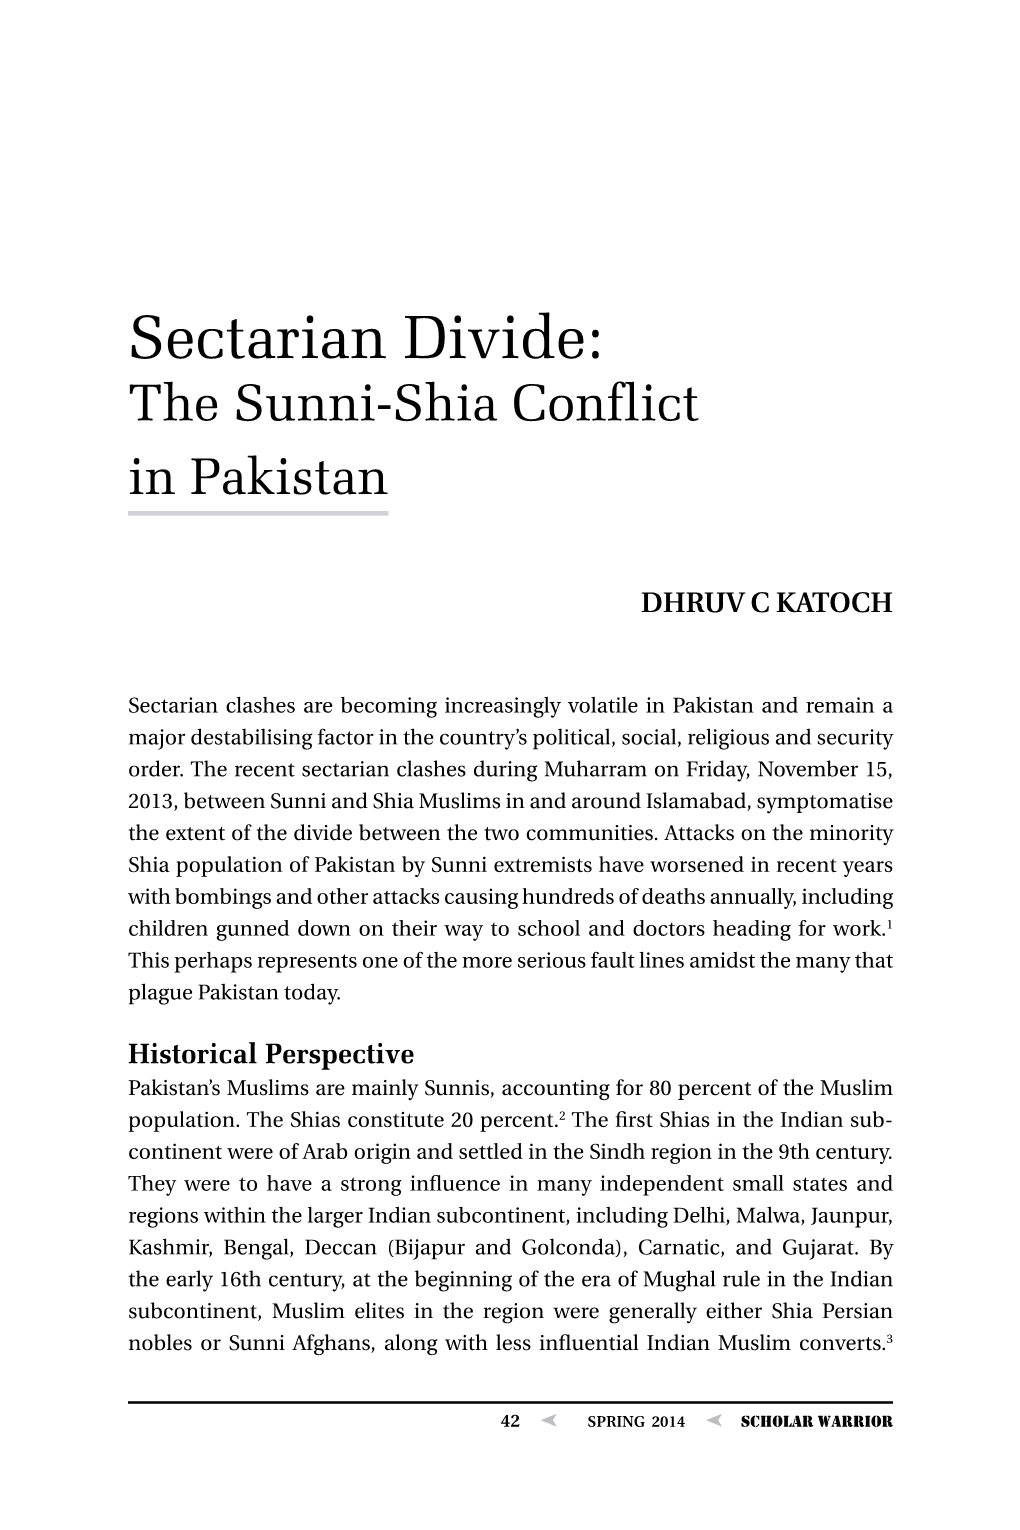 Sectarian Divide: the Sunni-Shia Conflict in Pakistan